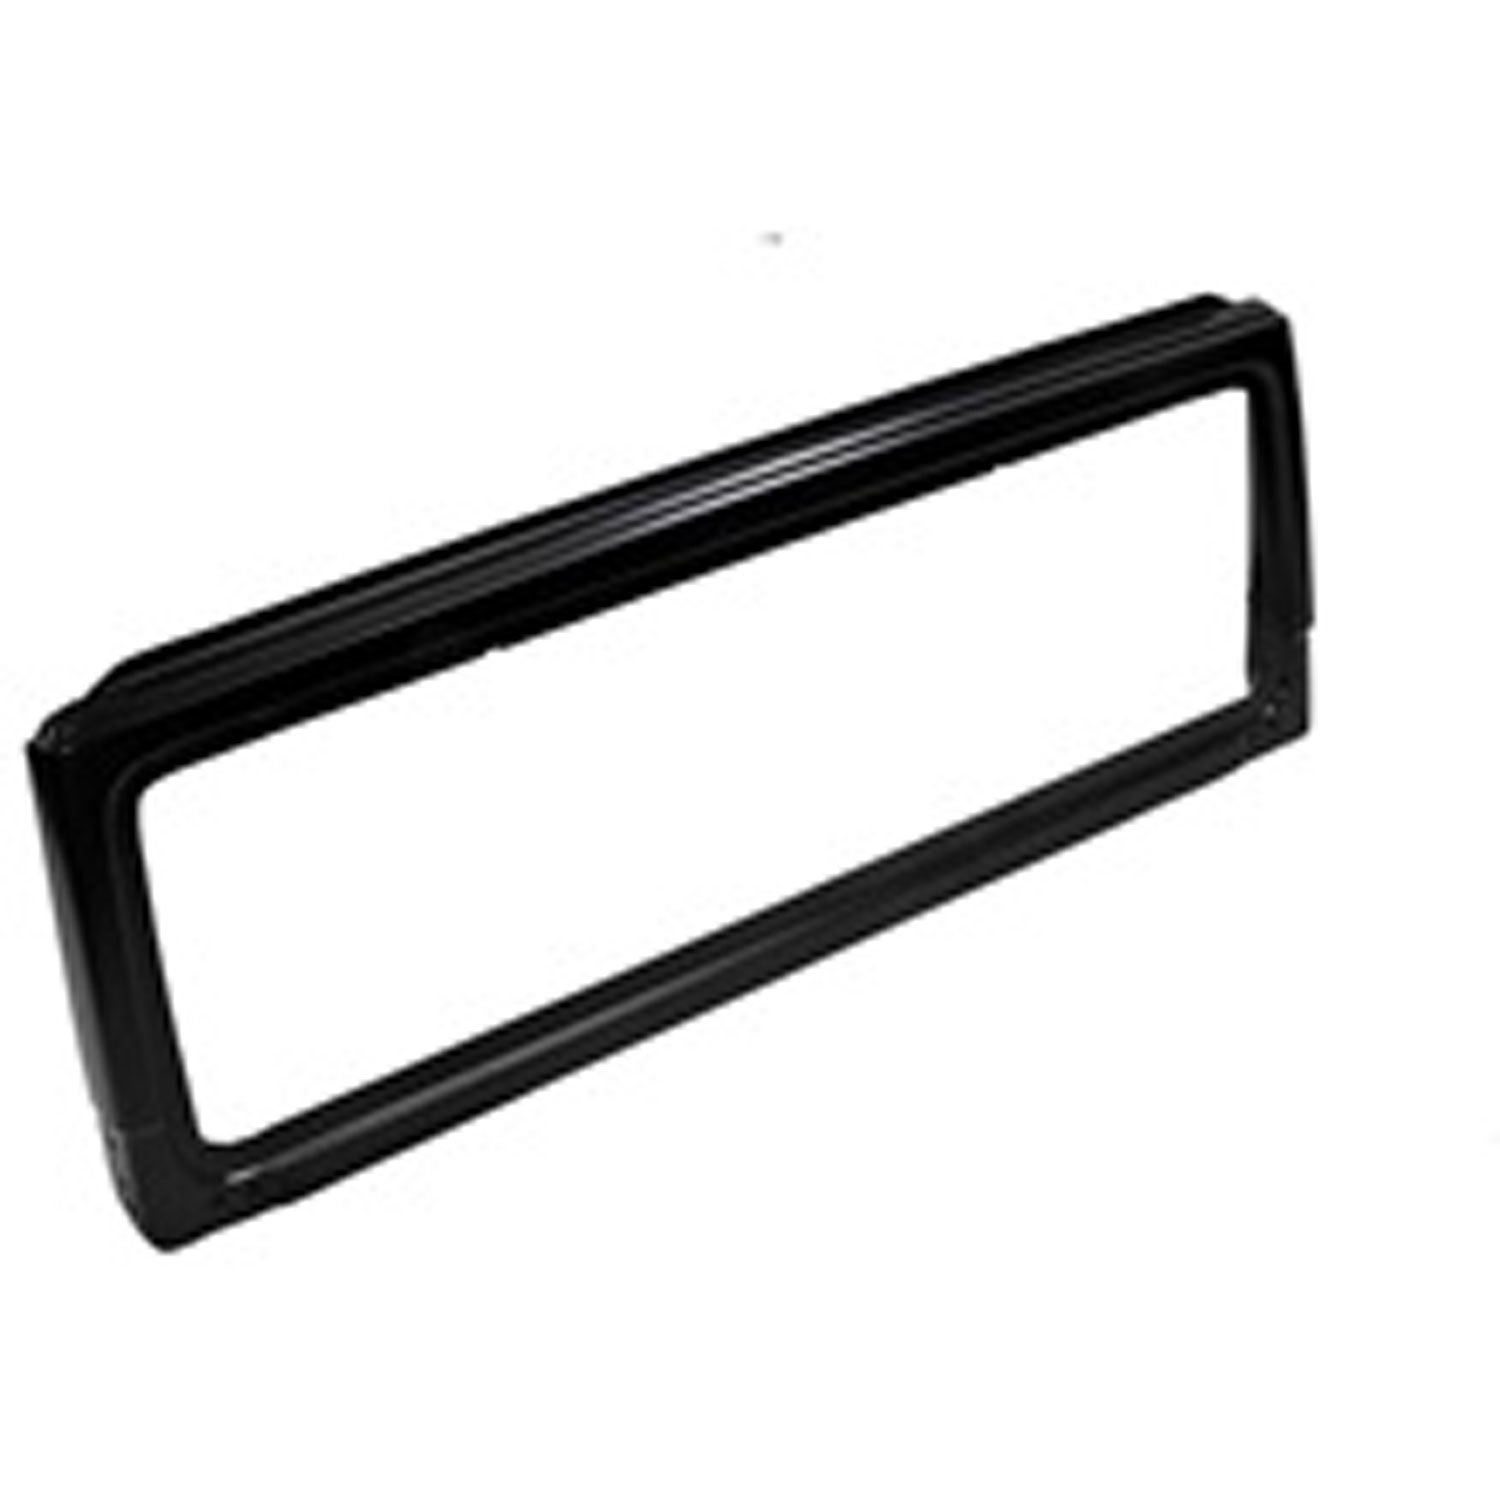 Replacement windshield frame from Omix-ADA, Fits 97-02 Jeep